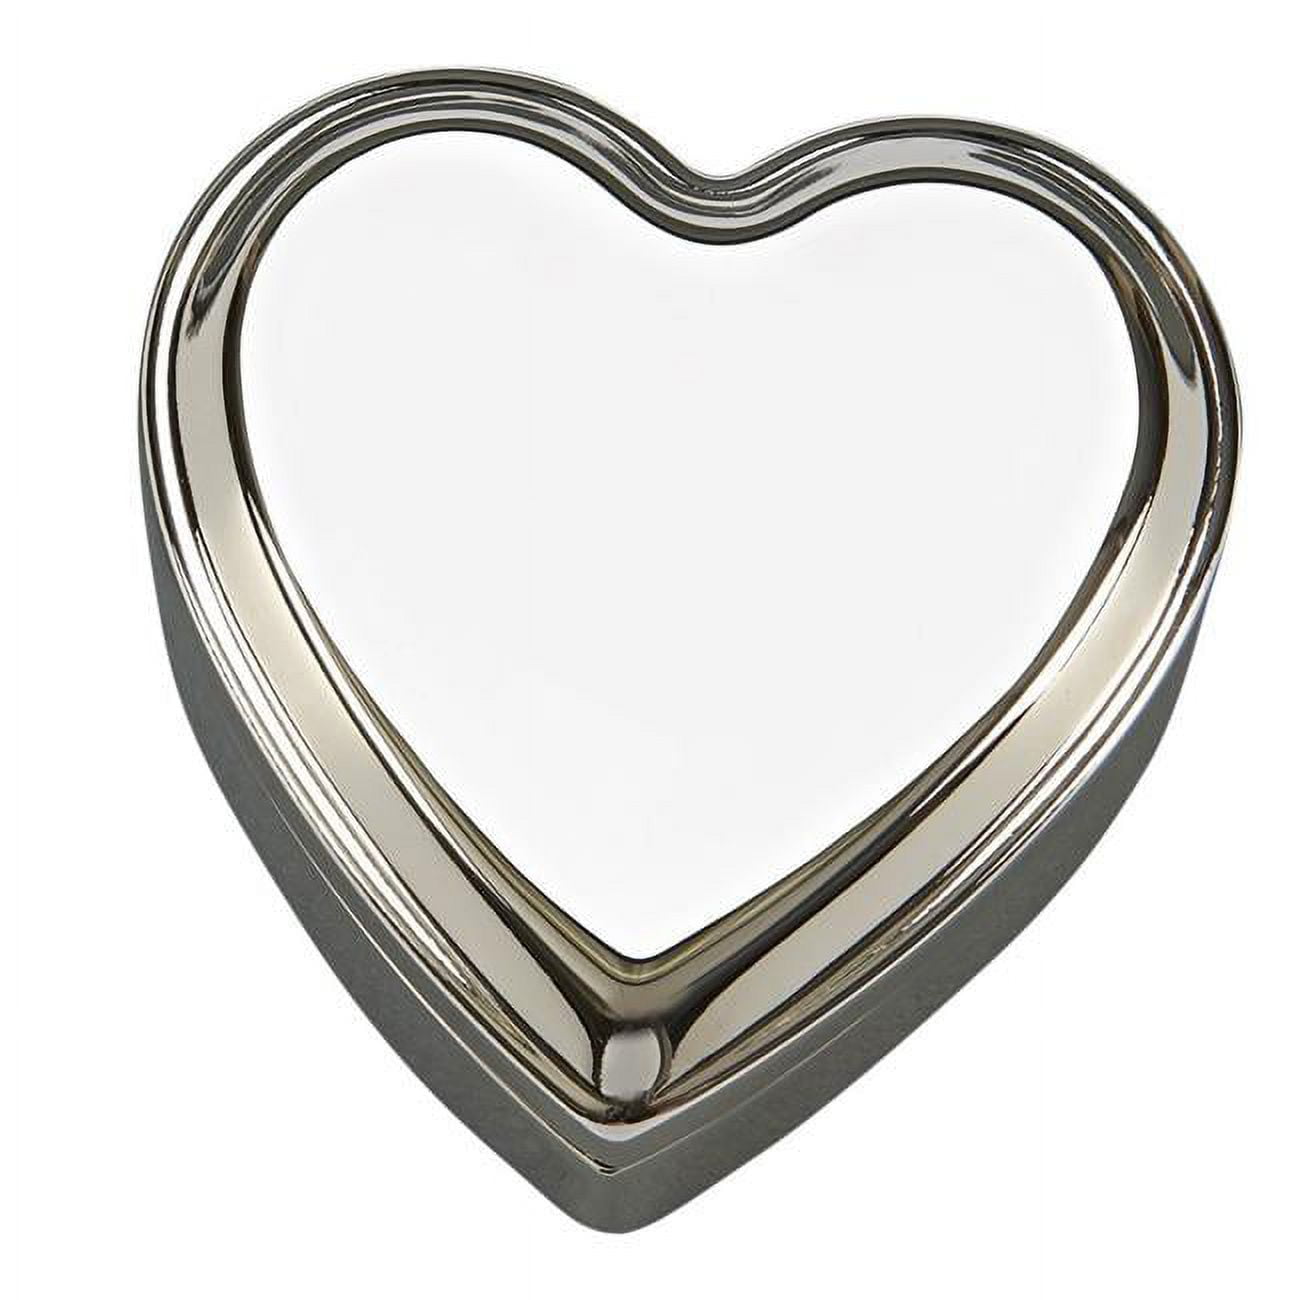 026014 3.5 In. Heart Box Lift Top - Nickel Plated